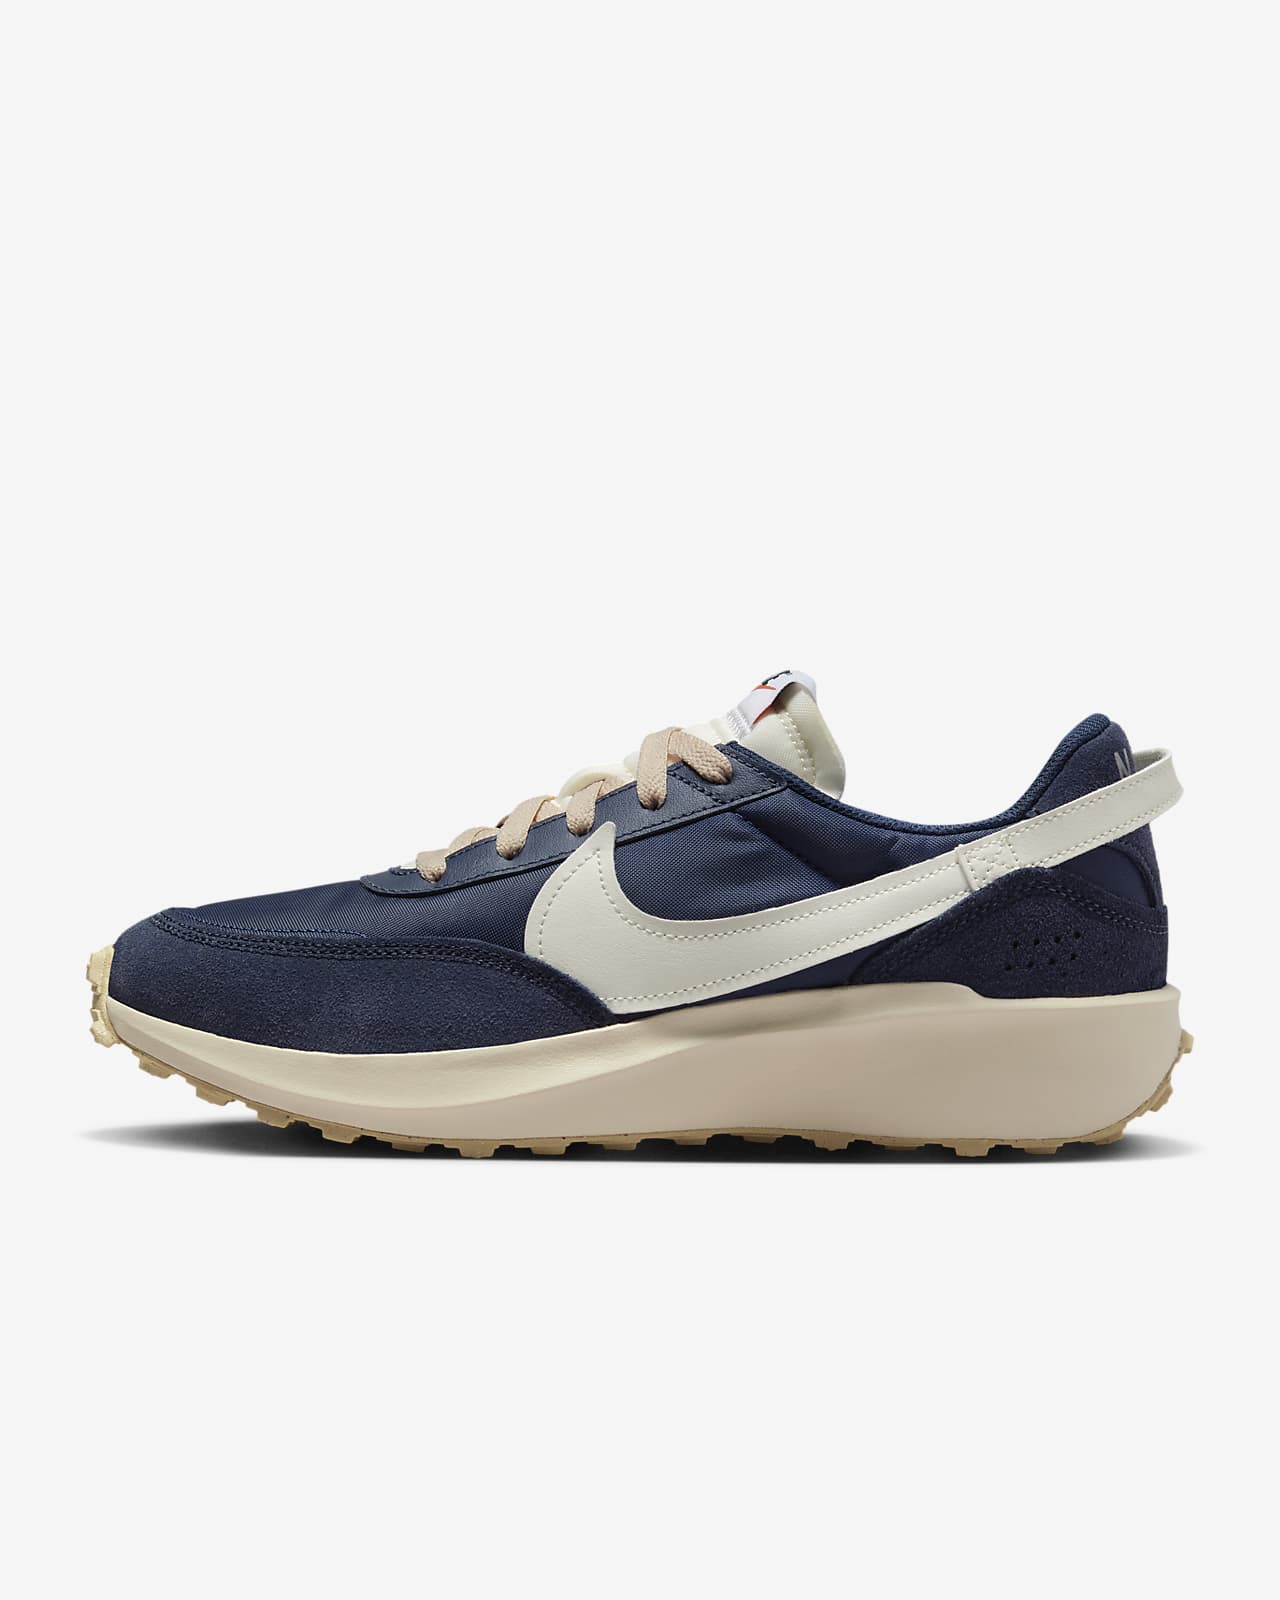 nike mens shoes blue and white